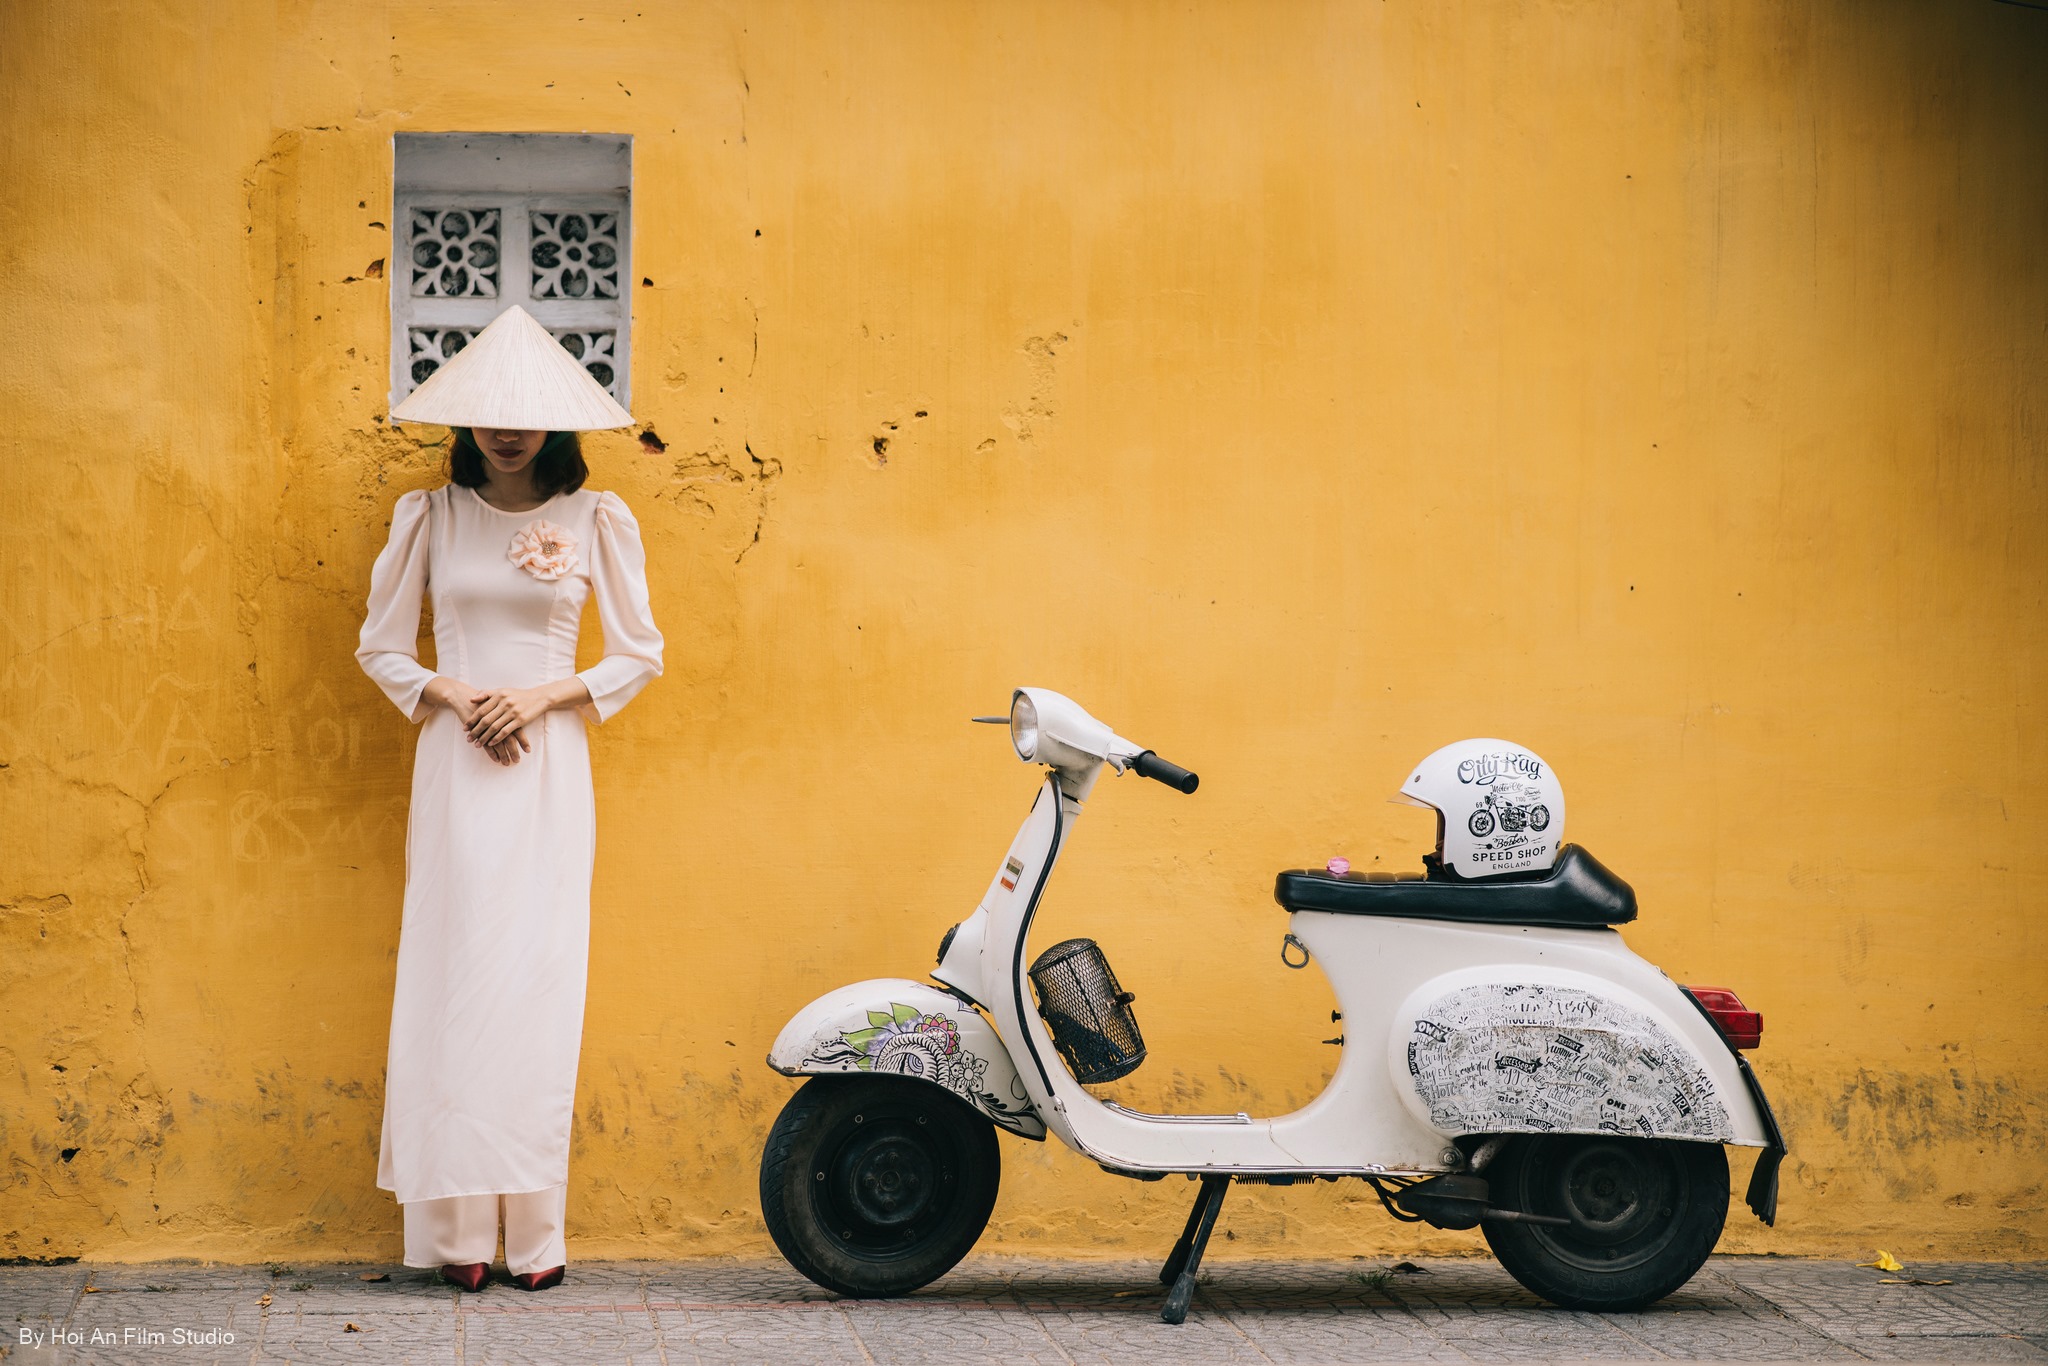 HOI AN COUNTRYSIDE & ISLANDS DISCOVERY WITH “VESPA” 